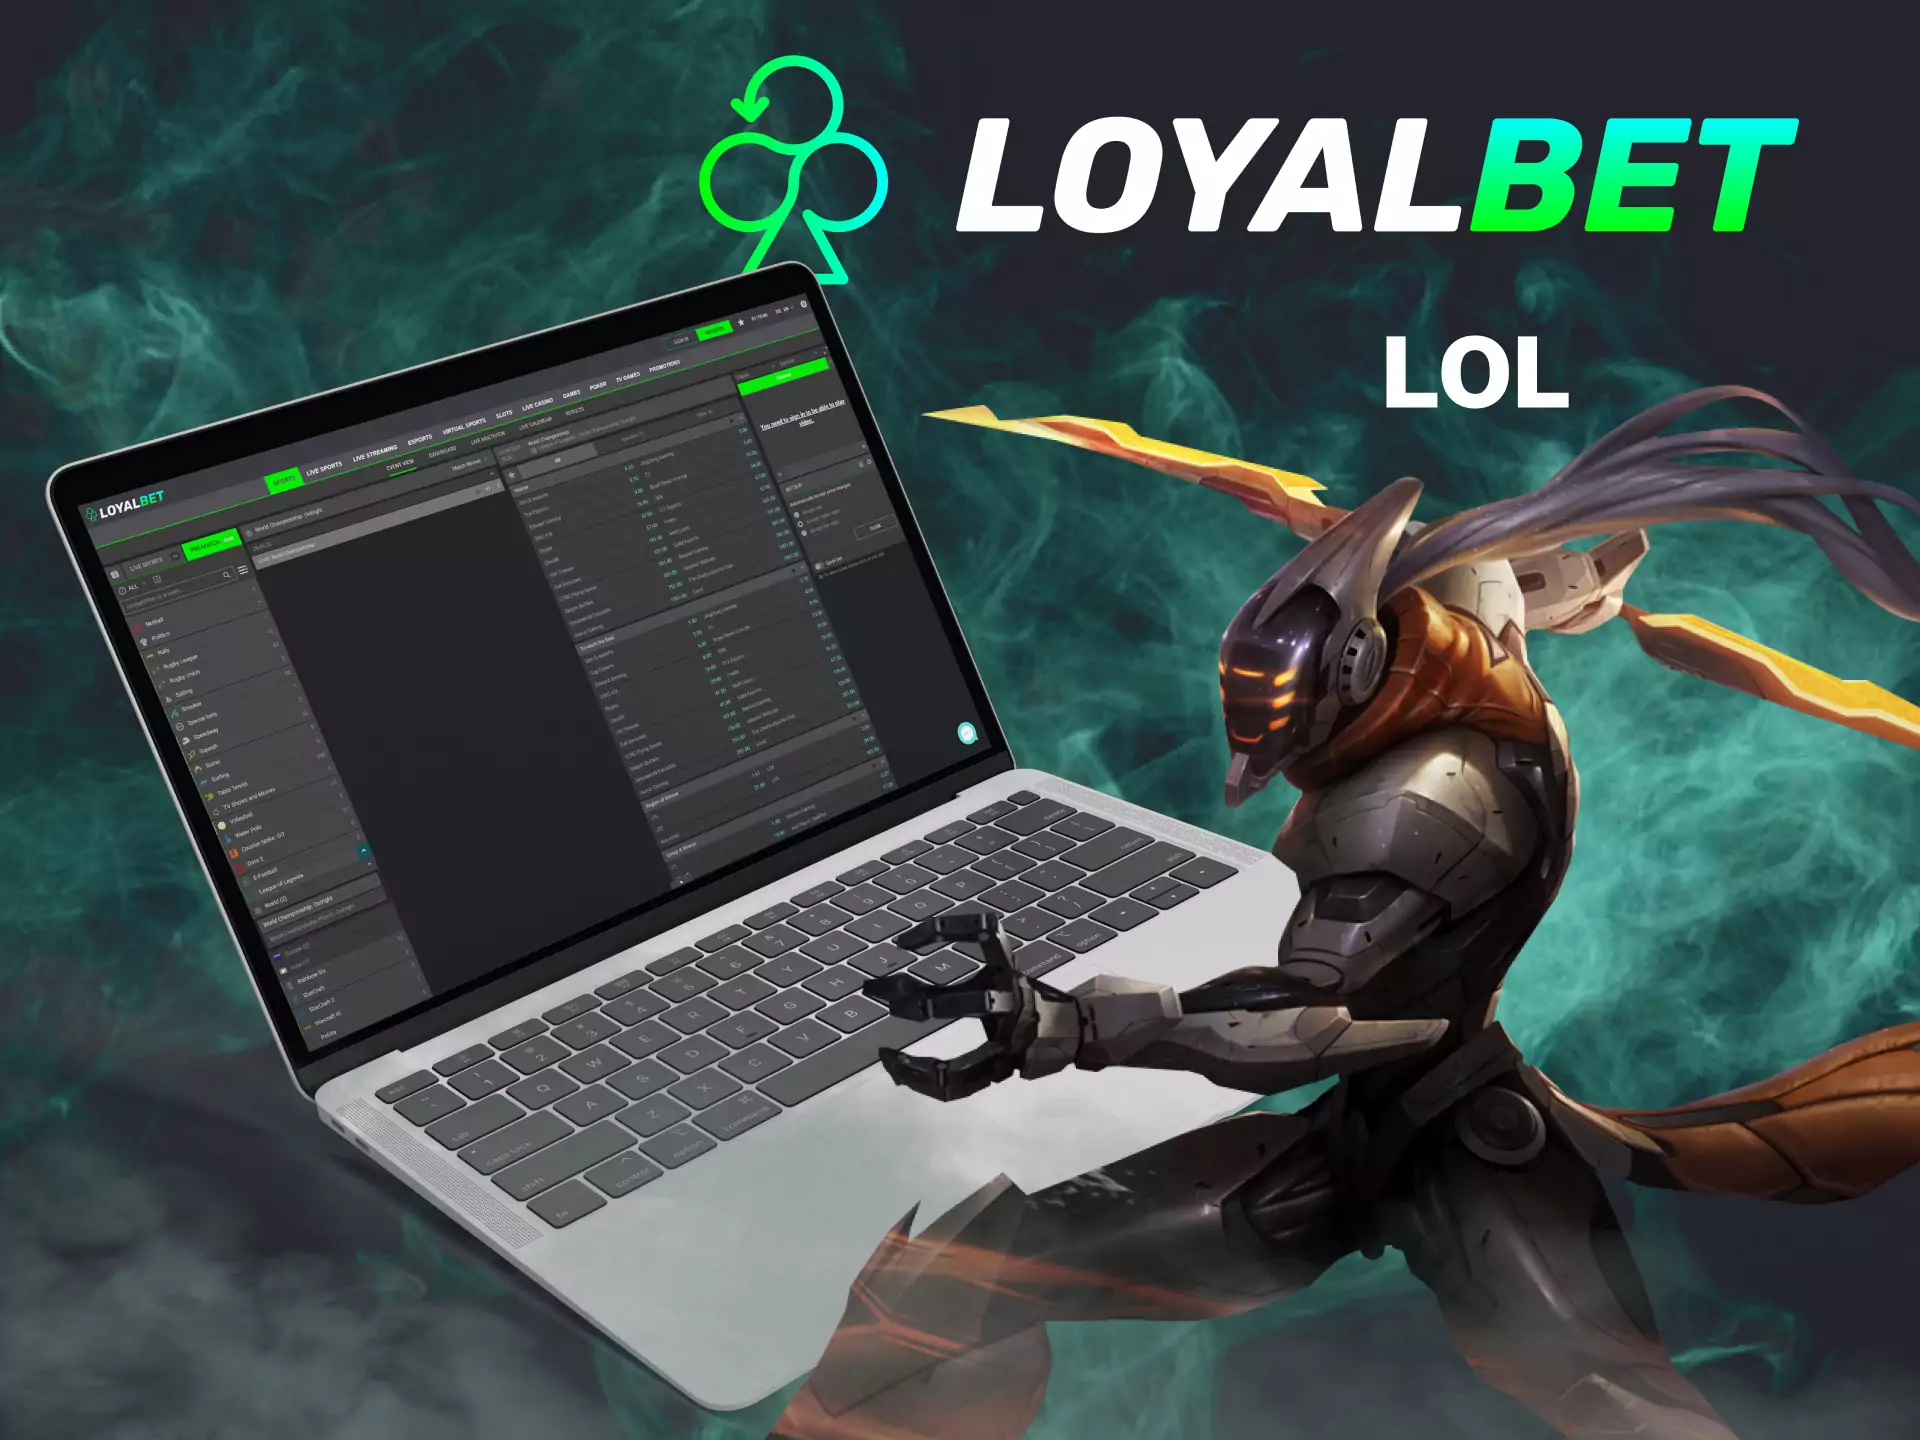 On Loyalbet, there are lots of LoL matches available for betting.